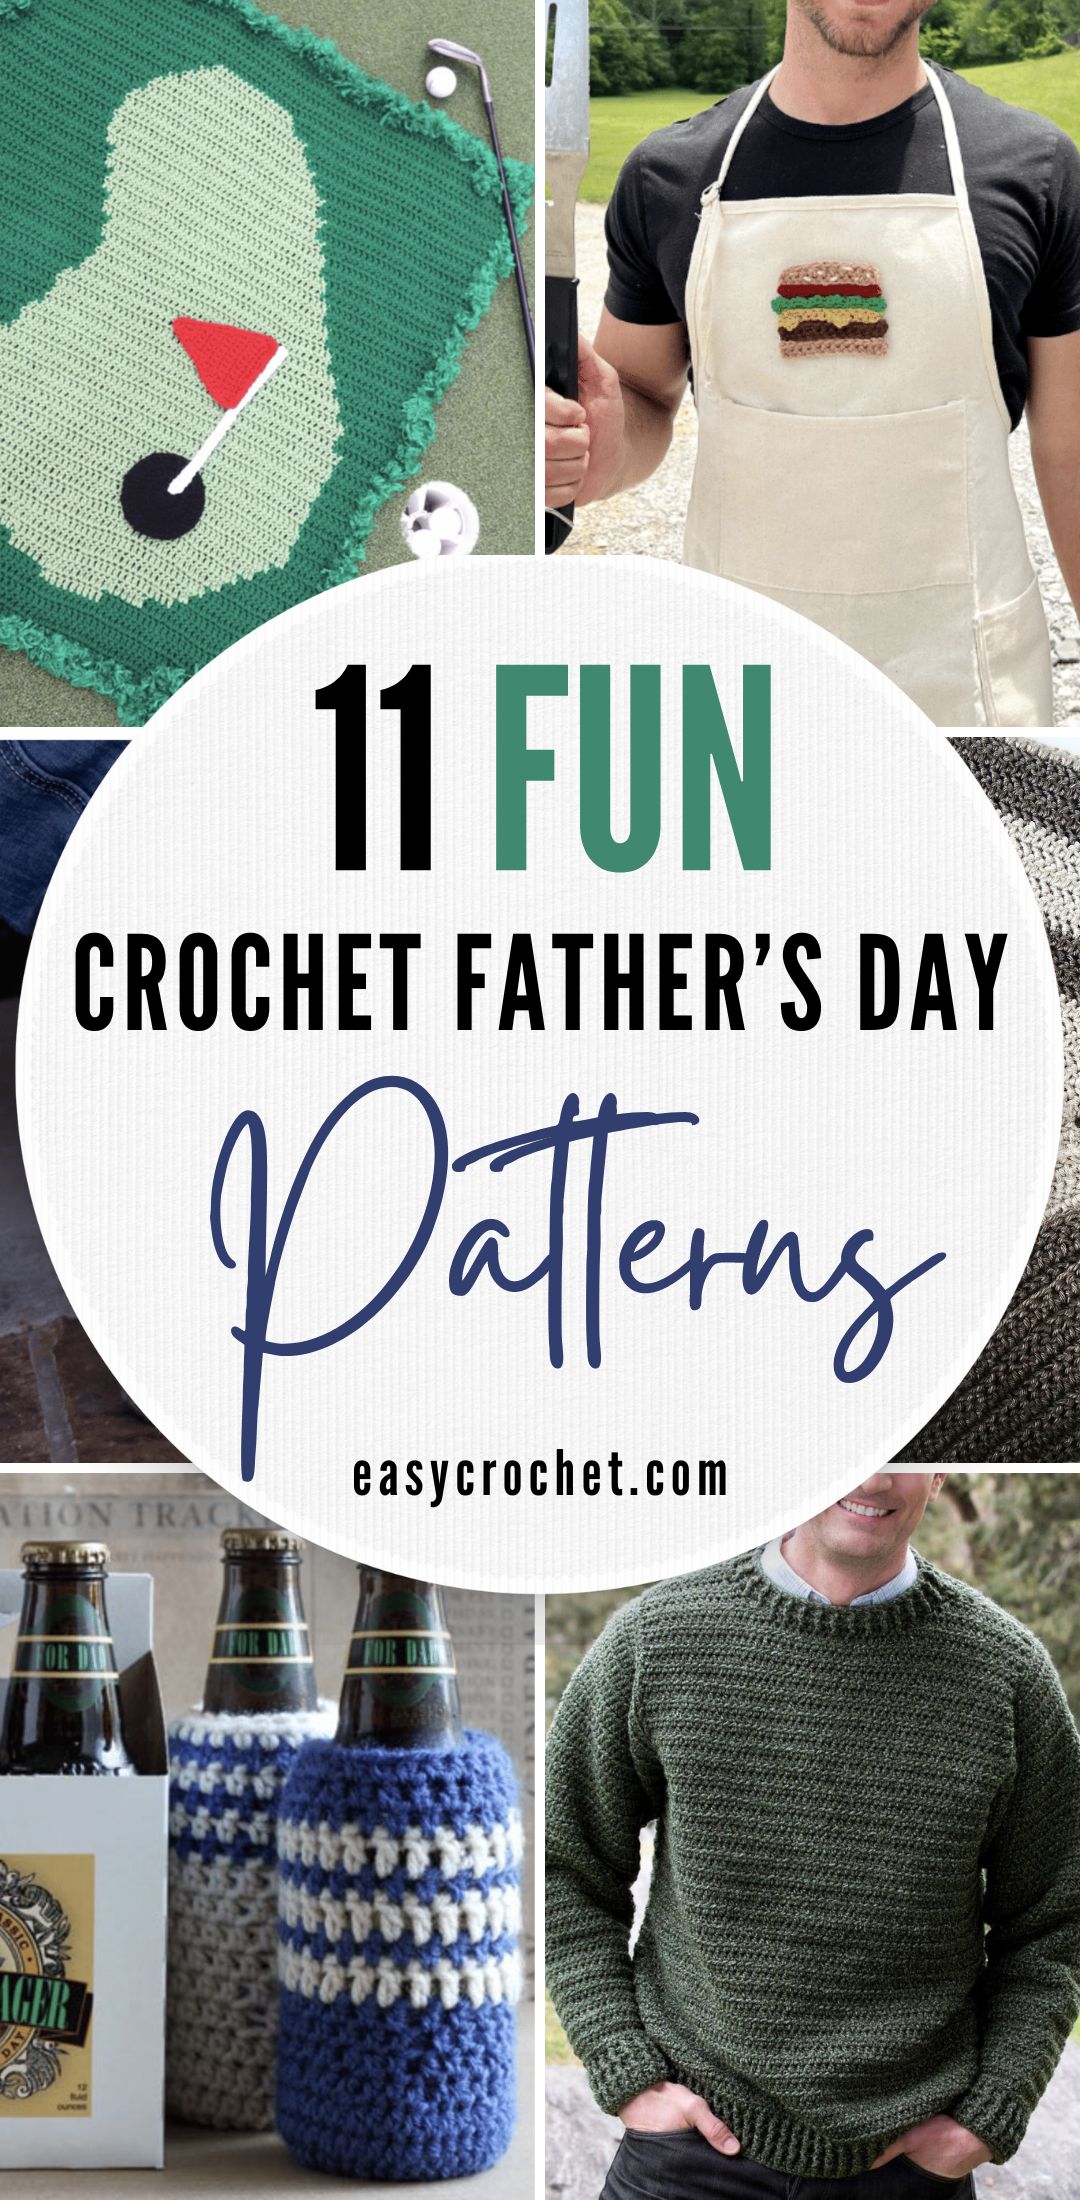 Crochet Gifts For Father's Day - Bella Coco Crochet